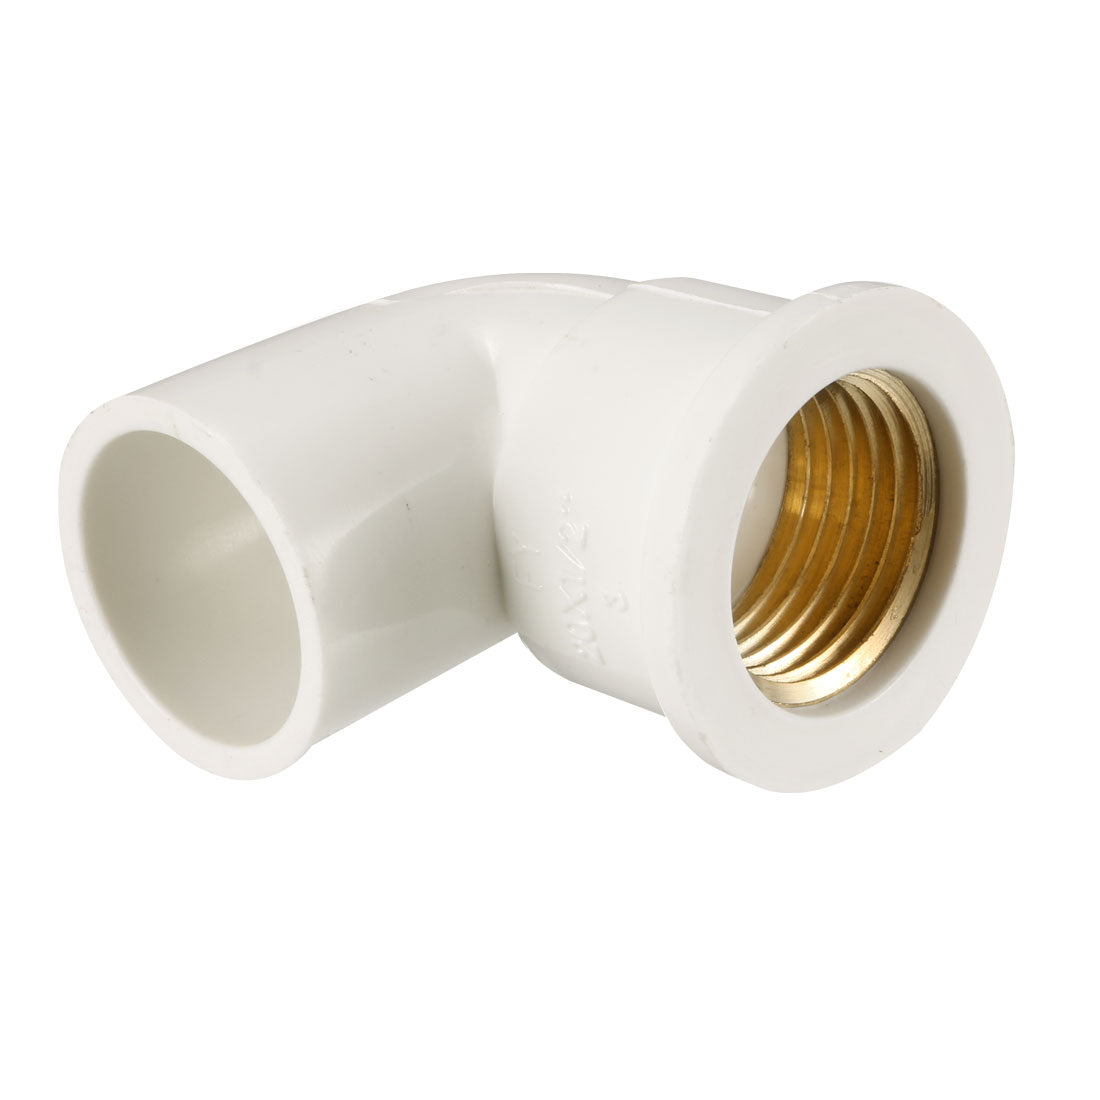 uxcell Uxcell 20mm Slip x 1/2PT Female Thread 90 Degree PVC Pipe Fitting Elbow 2 Pcs